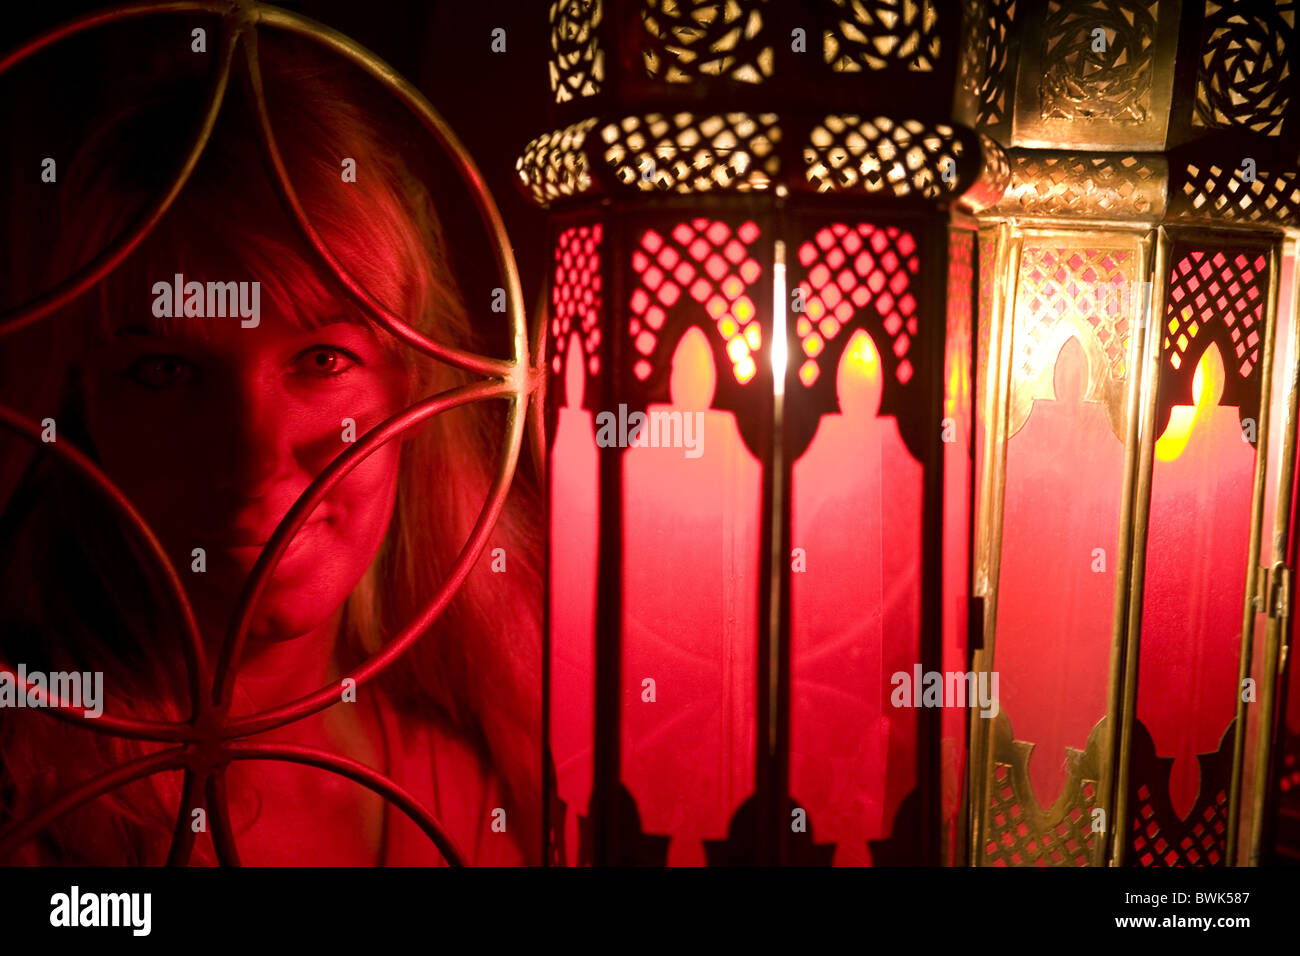 Woman poses in front of a Moroccan lamps at Café Arabe restaurant, Marrakech, Morocco Stock Photo